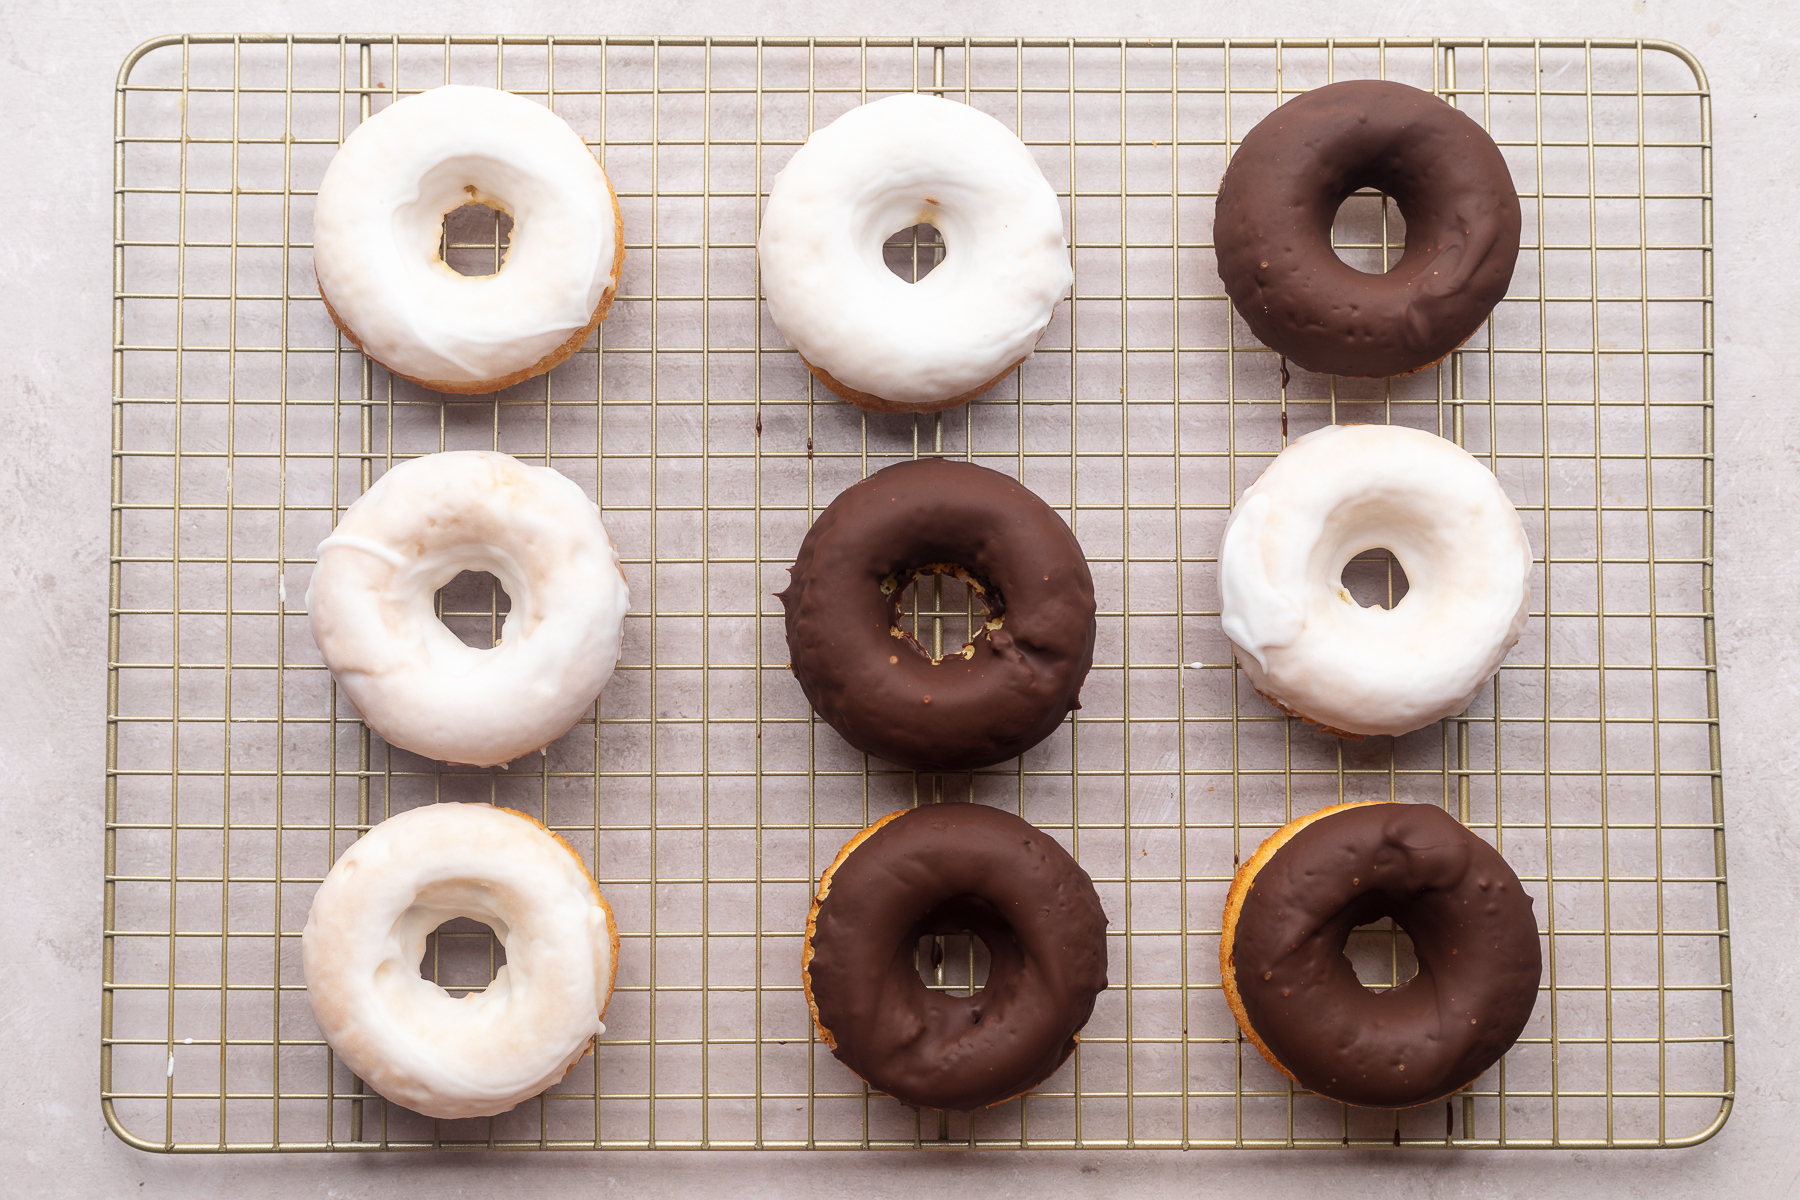 Keto Donuts with Brown Butter Glaze - All Day I Dream About Food